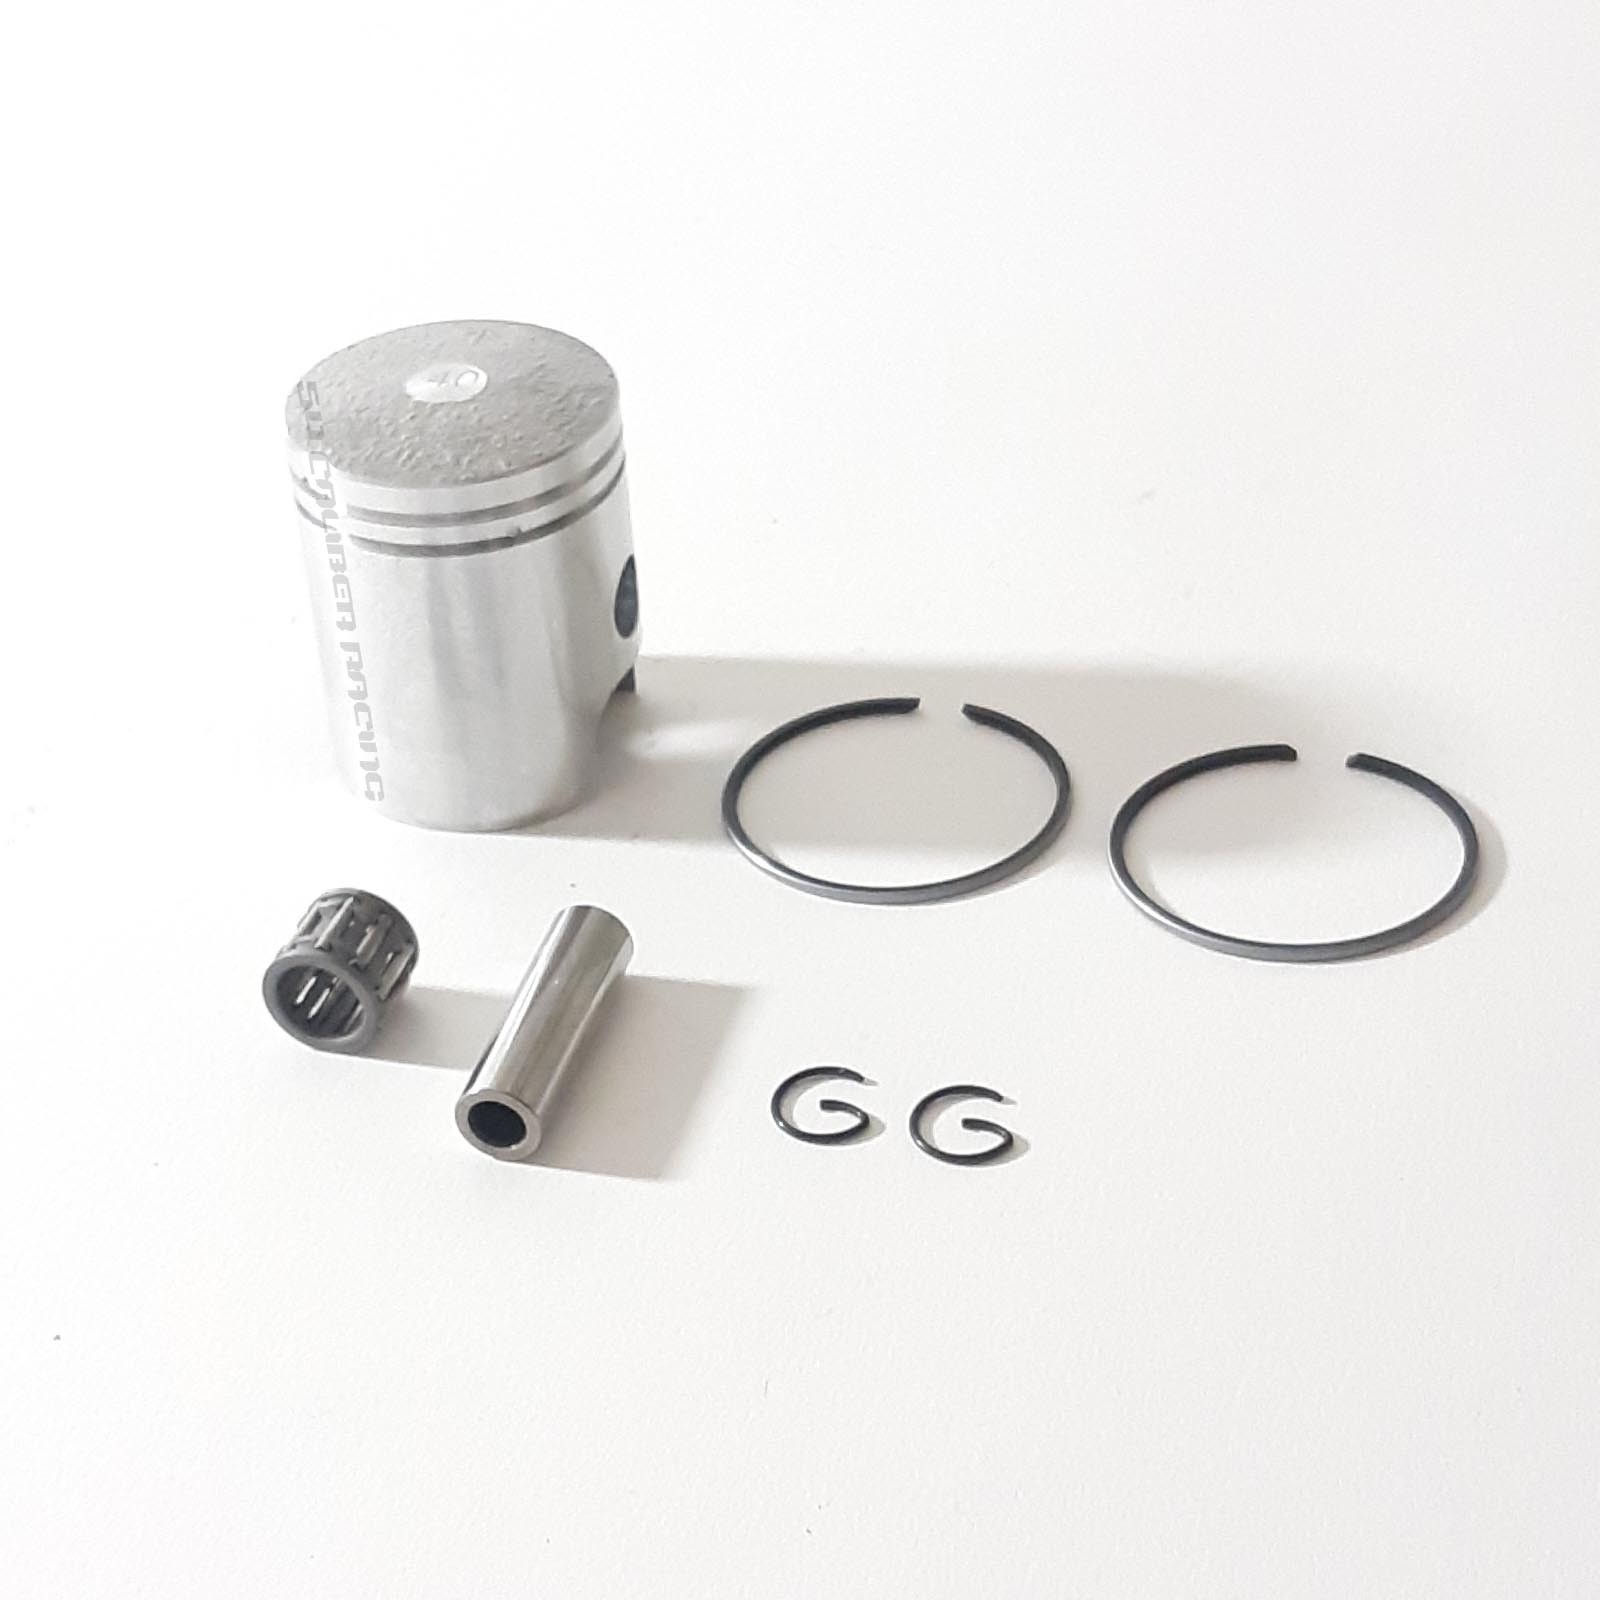 Yamaha Pw 50 Pw50 Exhaust Muffler Assembly Cylinder Piston Top End Kit 1981-2009 